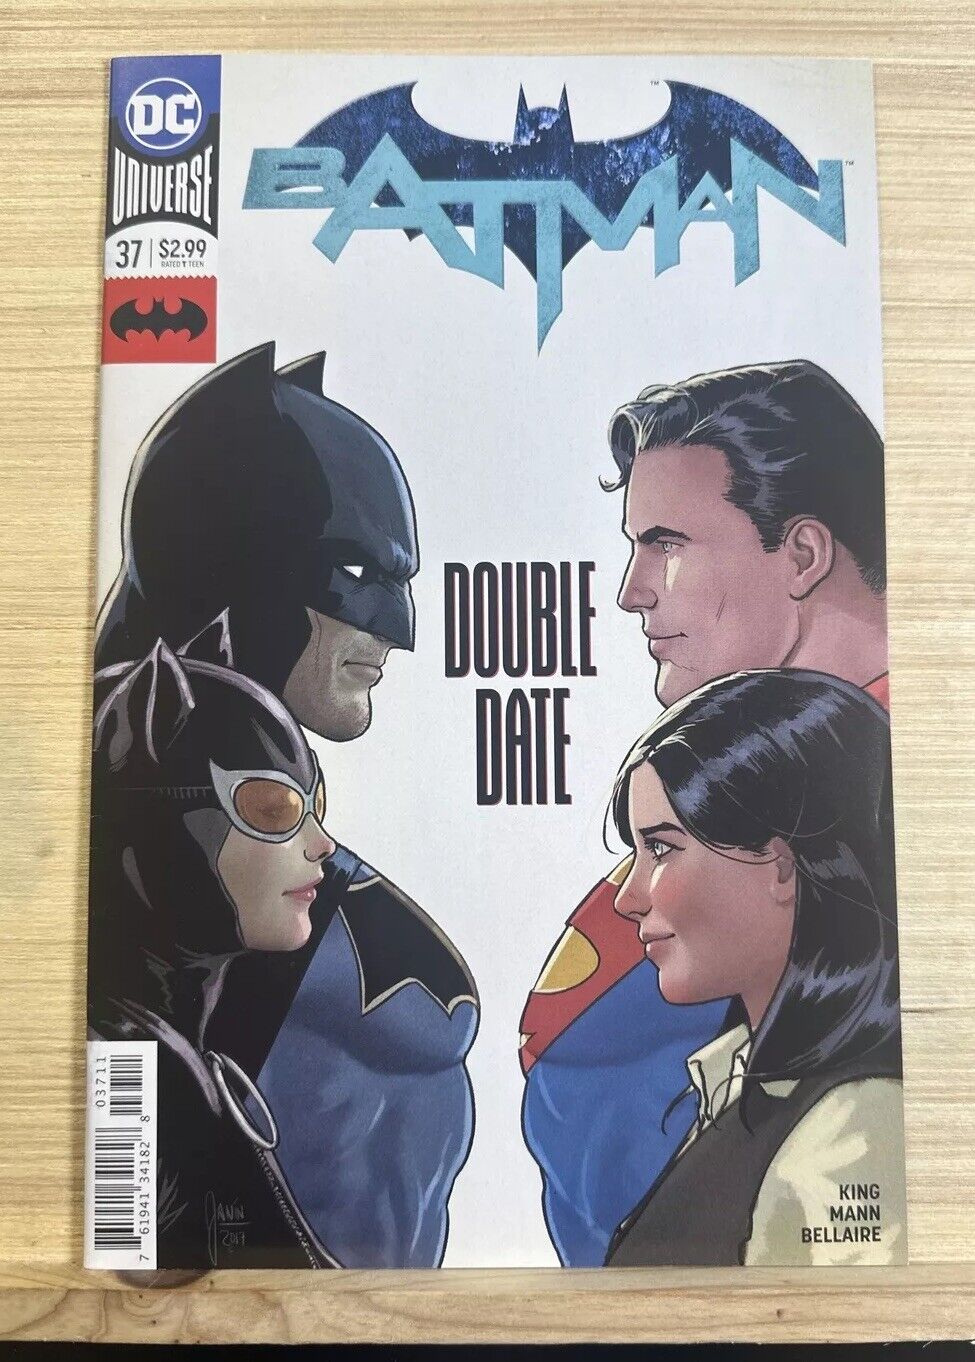 Batman Volume 3 (2018) Issue #37 Double Date Key Issue